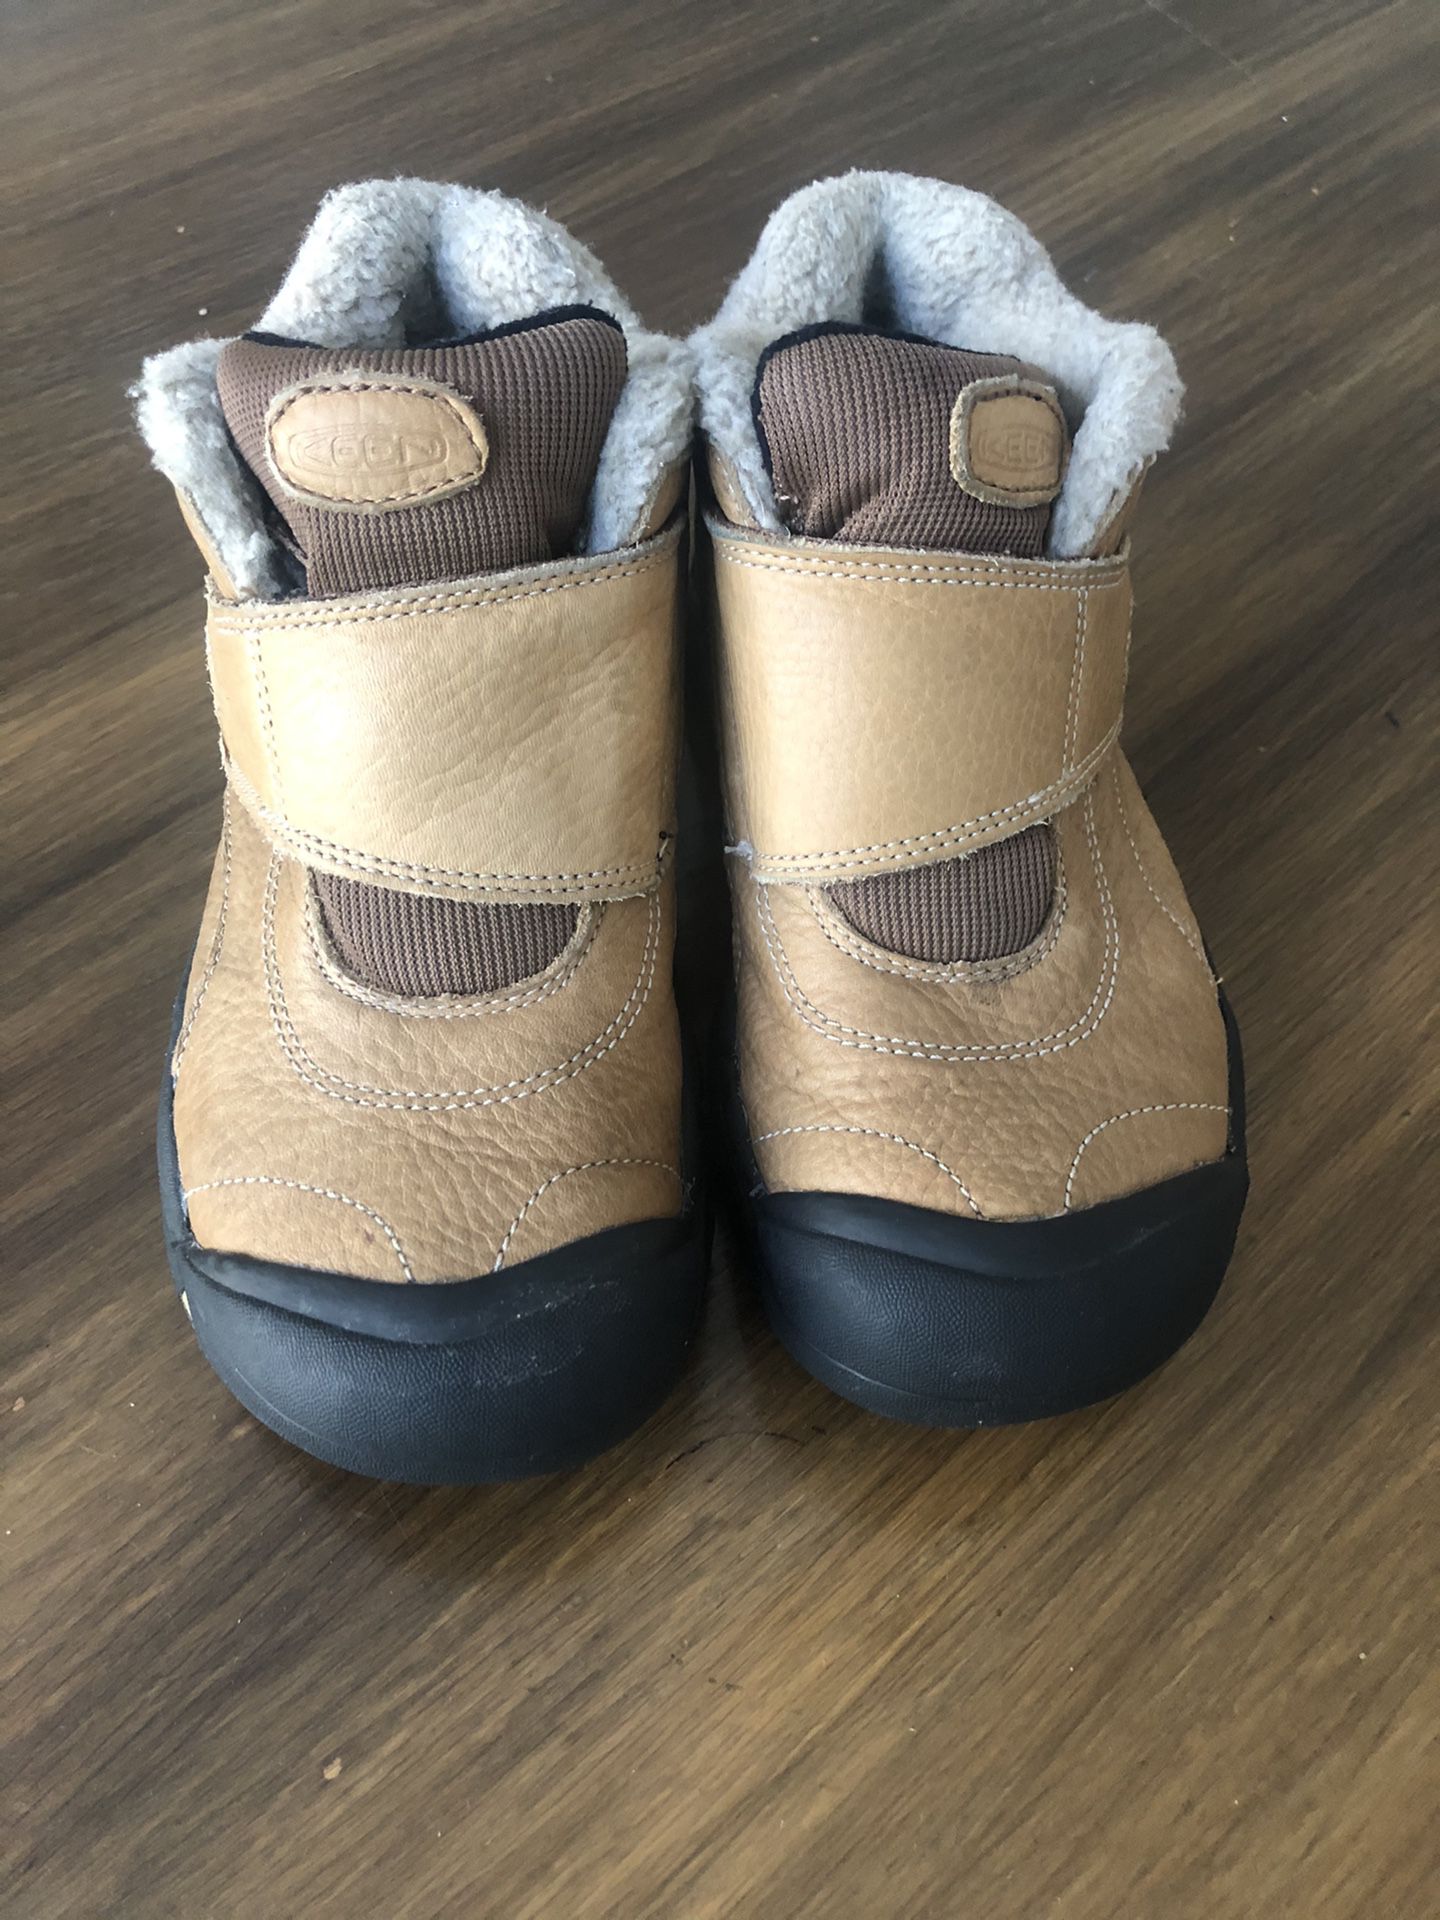 Keen Boots- size 3 youth